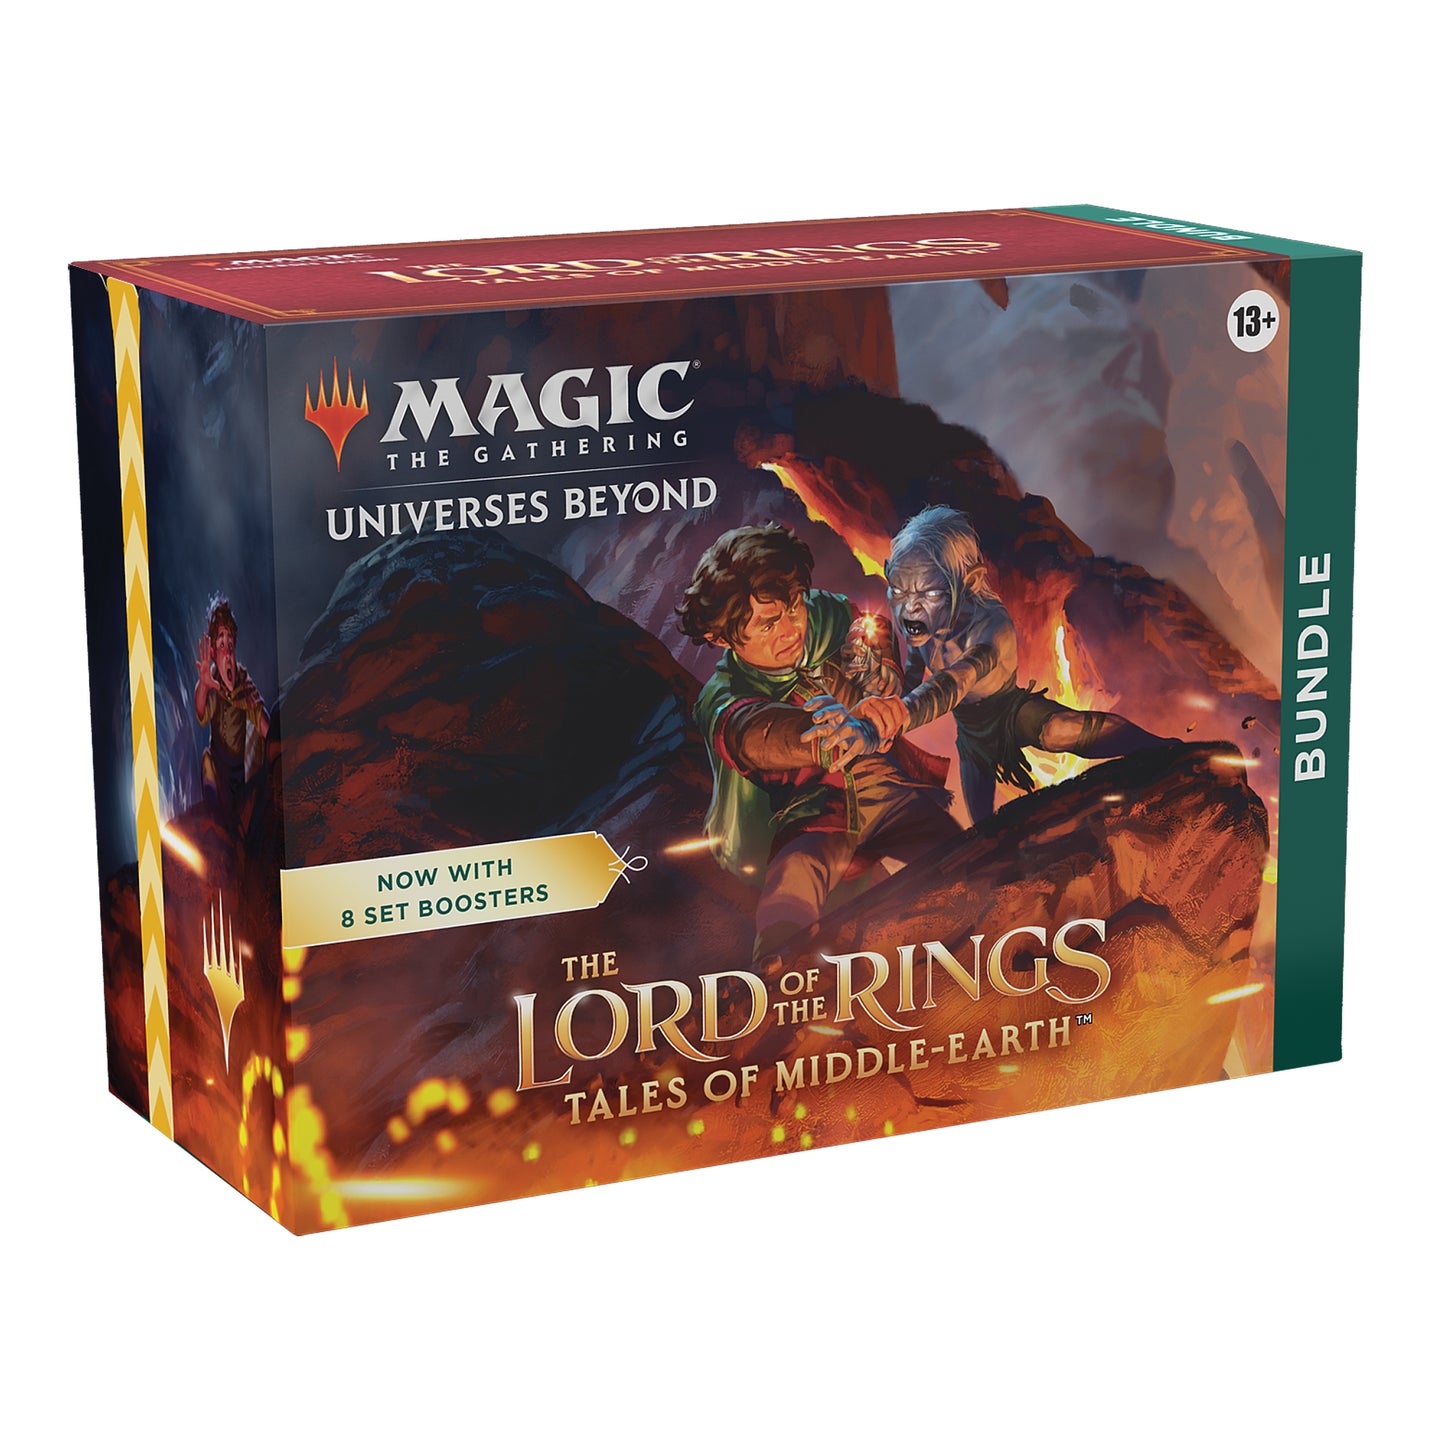 Magic the Gathering: Lord of the Rings - Tales of Middle-earth Bundle cover art.